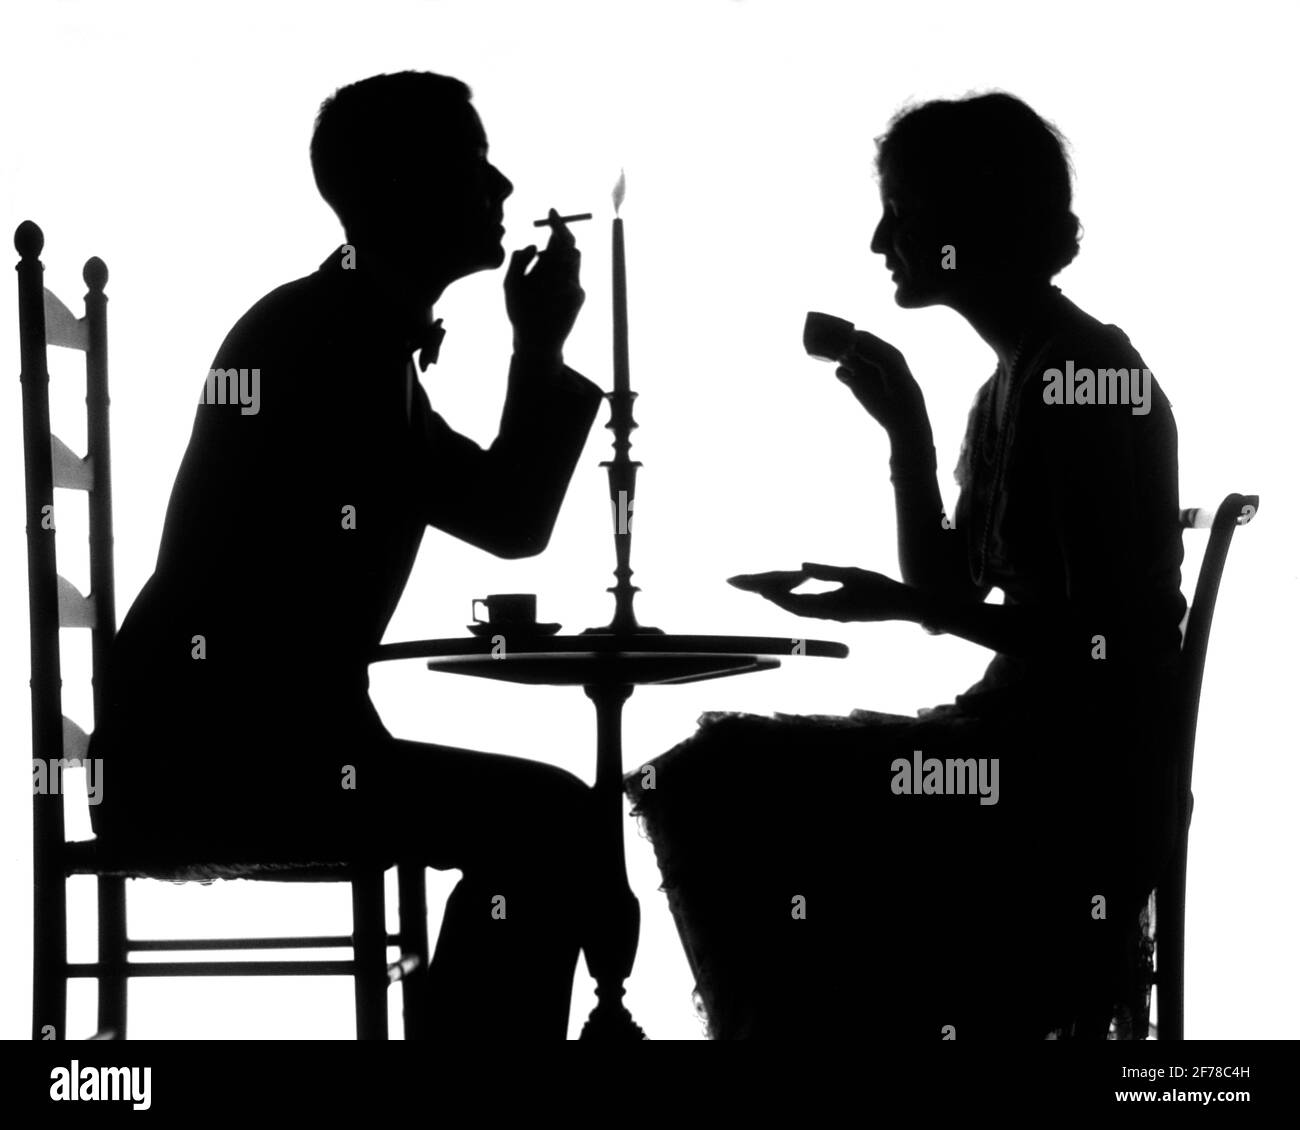 1920s SILHOUETTE OF COUPLE SITTING AT TABLE WOMAN DRINKING CUP OF TEA COFFEE MAN LIGHTING CIGARETTE FROM CANDLE FLAME - s1309 HAR001 HARS MYSTERY STRONG FLAME LIFESTYLE LIGHTING FEMALES MARRIED STUDIO SHOT SPOUSE HUSBANDS HOME LIFE COPY SPACE FRIENDSHIP FULL-LENGTH LADIES PERSONS CARING MALES SILHOUETTES B&W OUTLINE PARTNER DATING CIGARETTES HAPPINESS BEVERAGE TOBACCO SILHOUETTED FLUID ATTRACTION BAD HABIT SMOKER NICOTINE COURTSHIP CONCEPTUAL ADDICTIVE STYLISH ANONYMOUS CAFFEINE JOE PERSONAL ATTACHMENT POSSIBILITY AFFECTION EMOTION JAVA MID-ADULT MID-ADULT MAN MID-ADULT WOMAN SOCIAL ACTIVITY Stock Photo